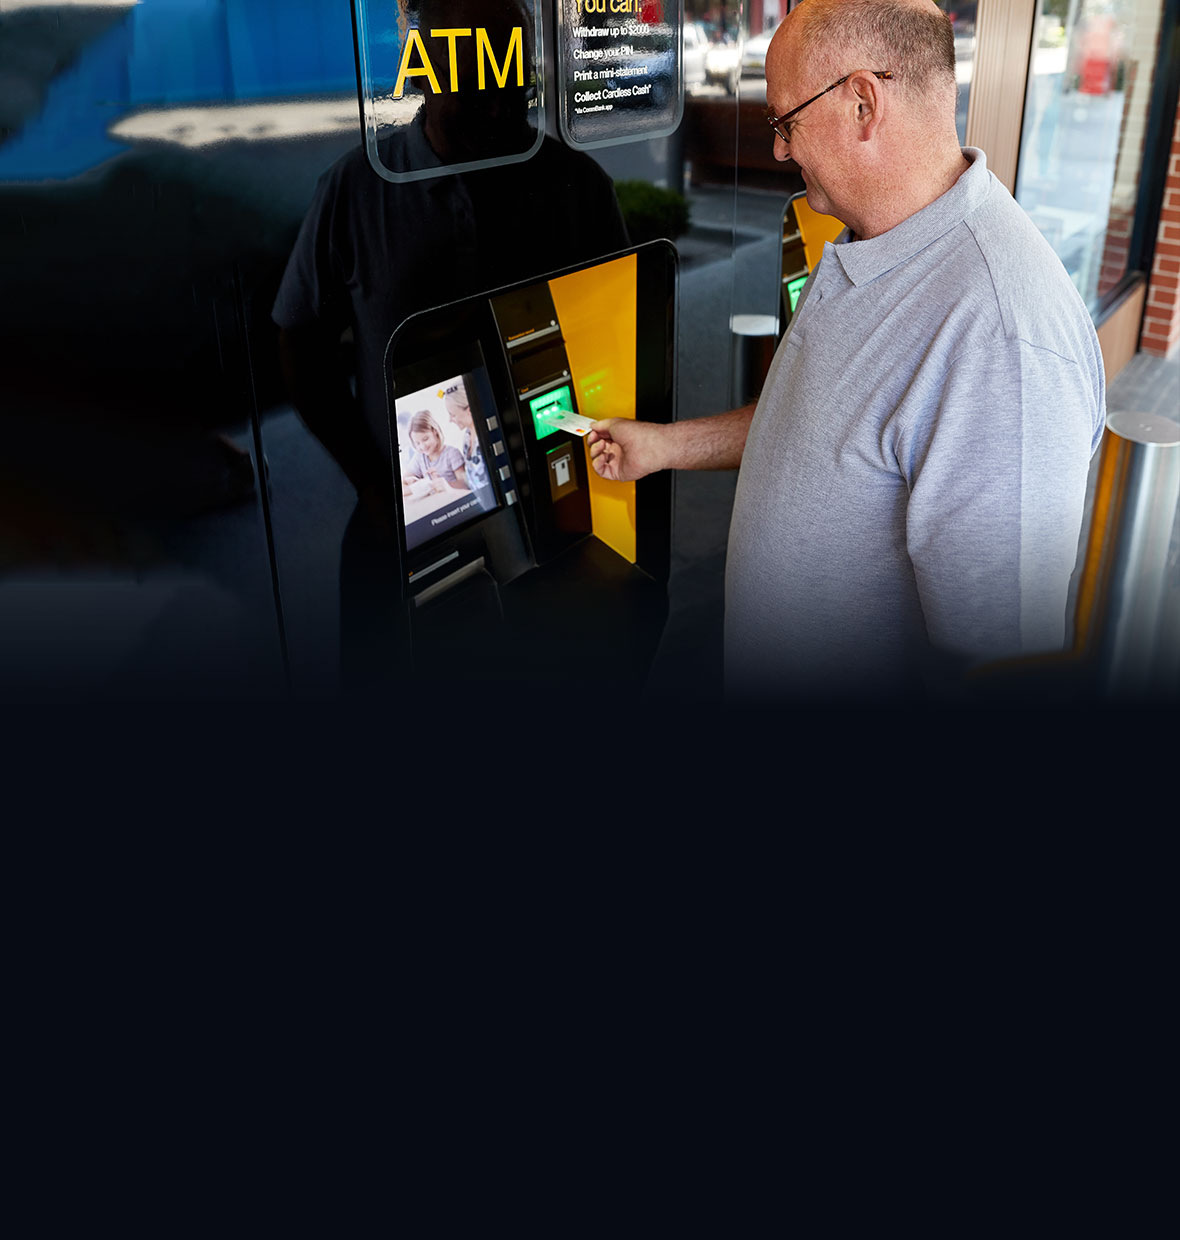 Man at CommBank ATM